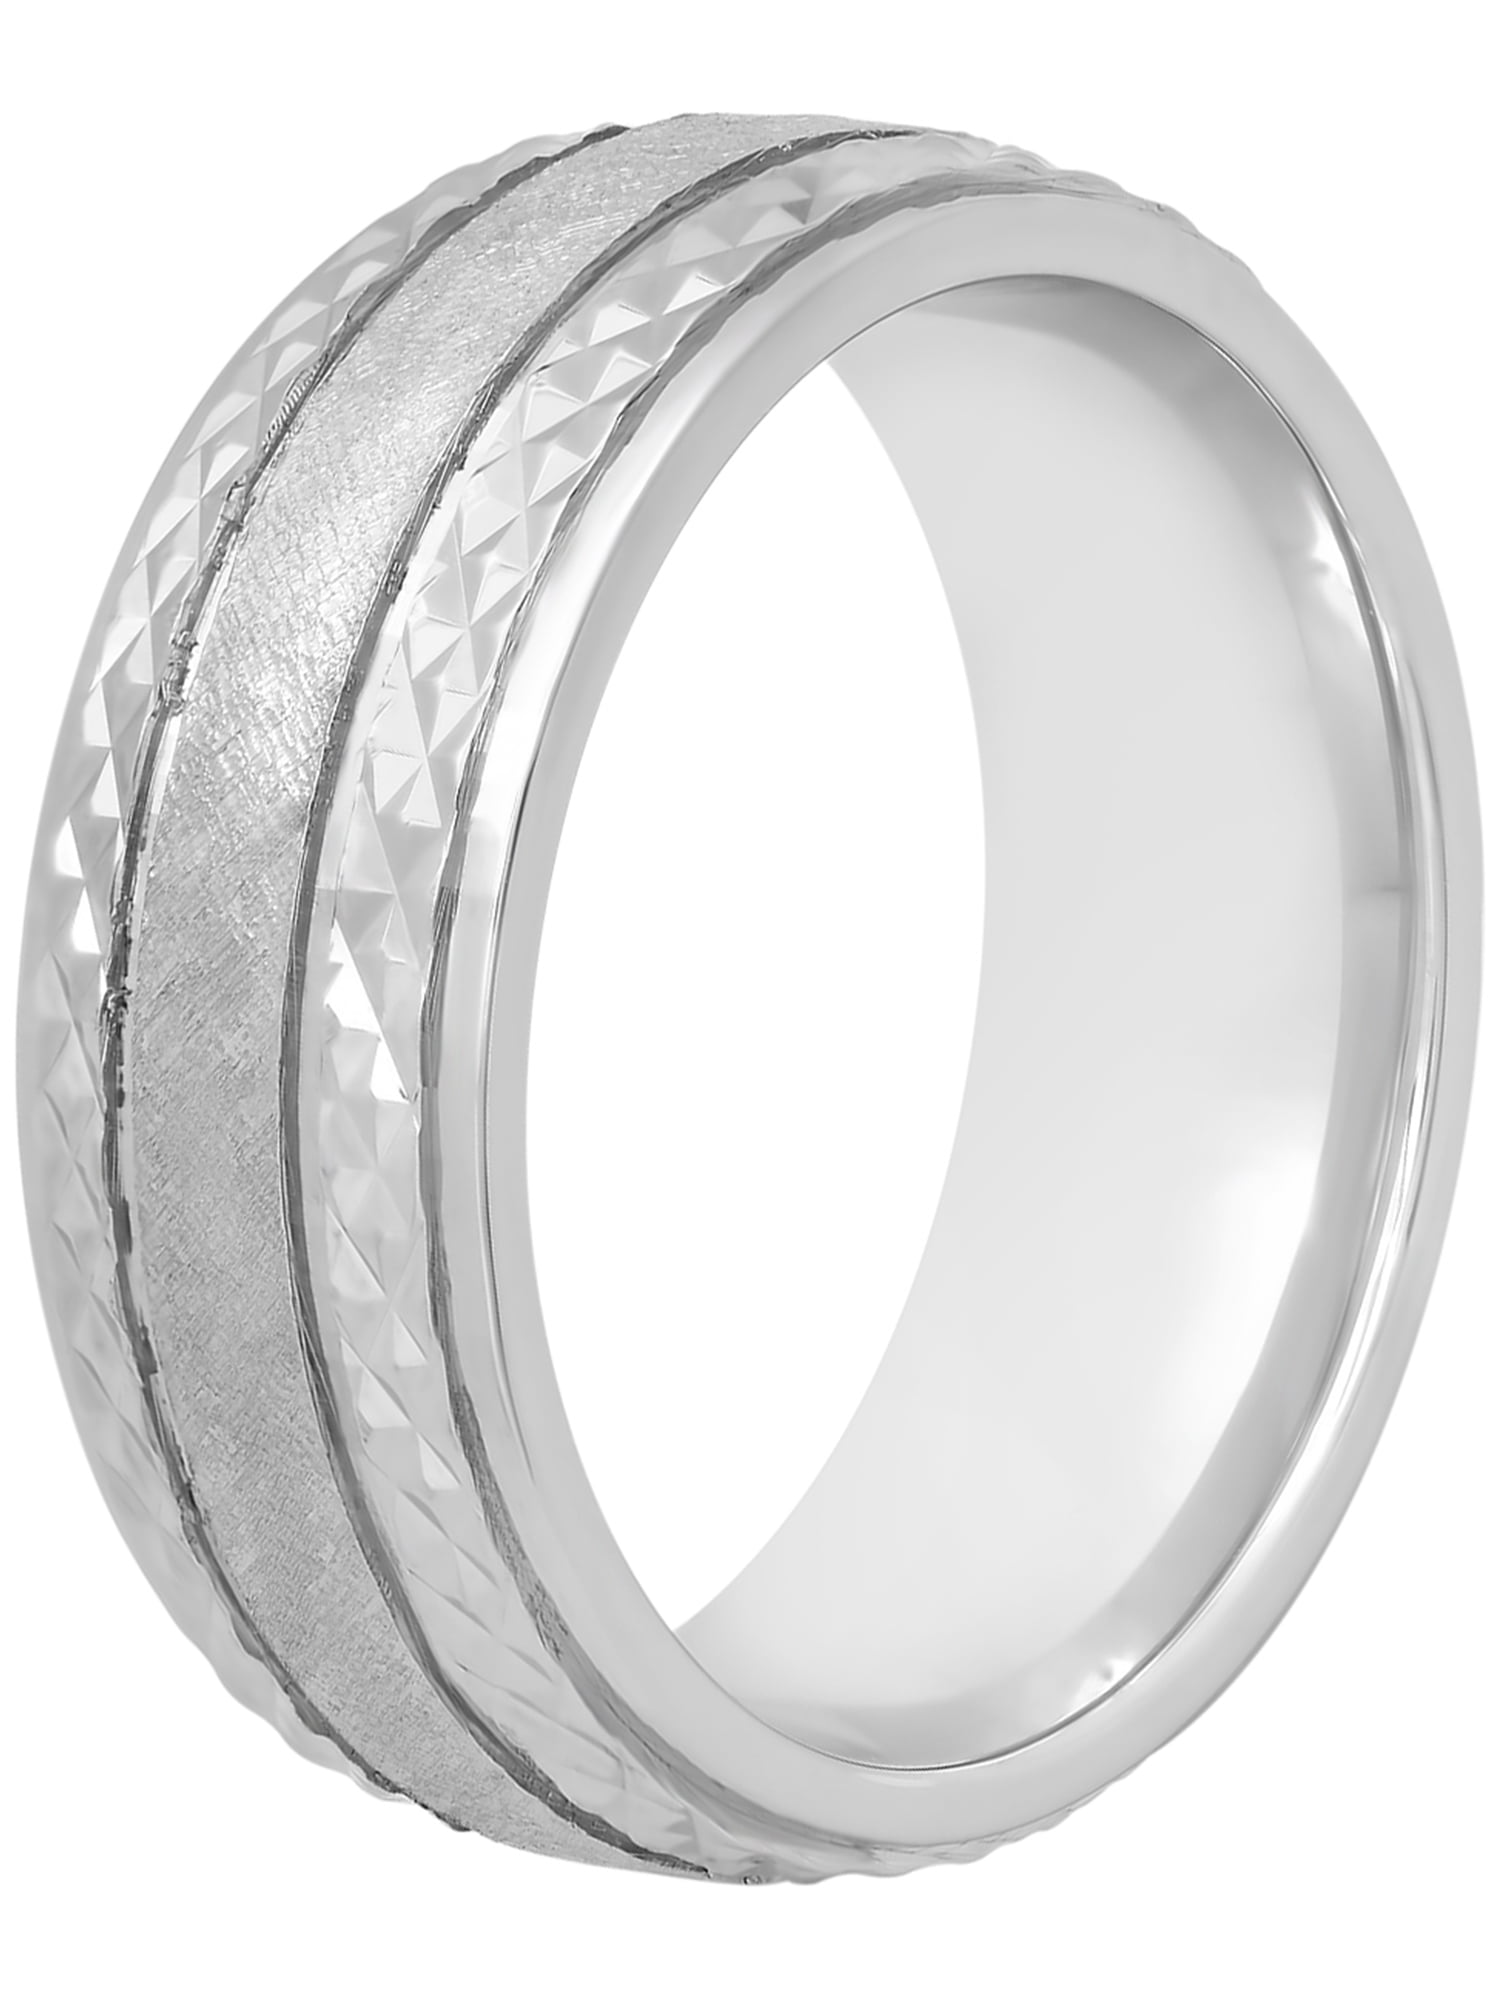 Jewelry Stores Network 7mm Sterling Silver Brushed Center Groove Wedding Band Ring